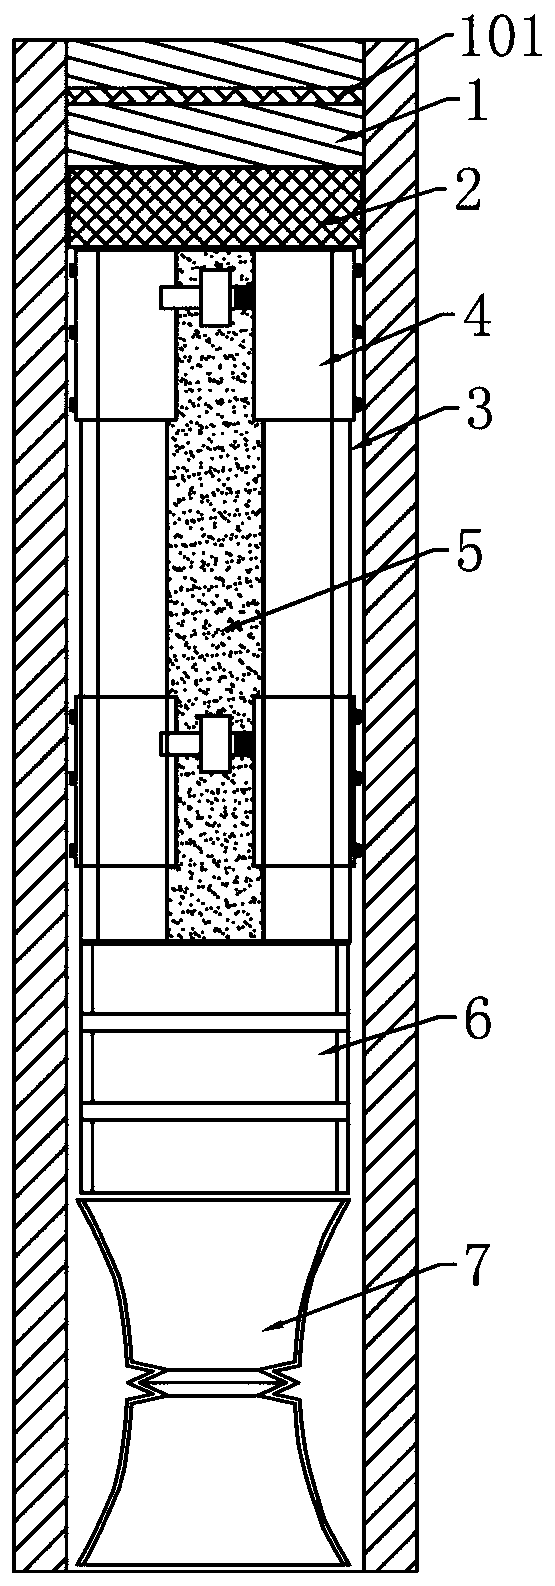 Deep hole blasting charge structure